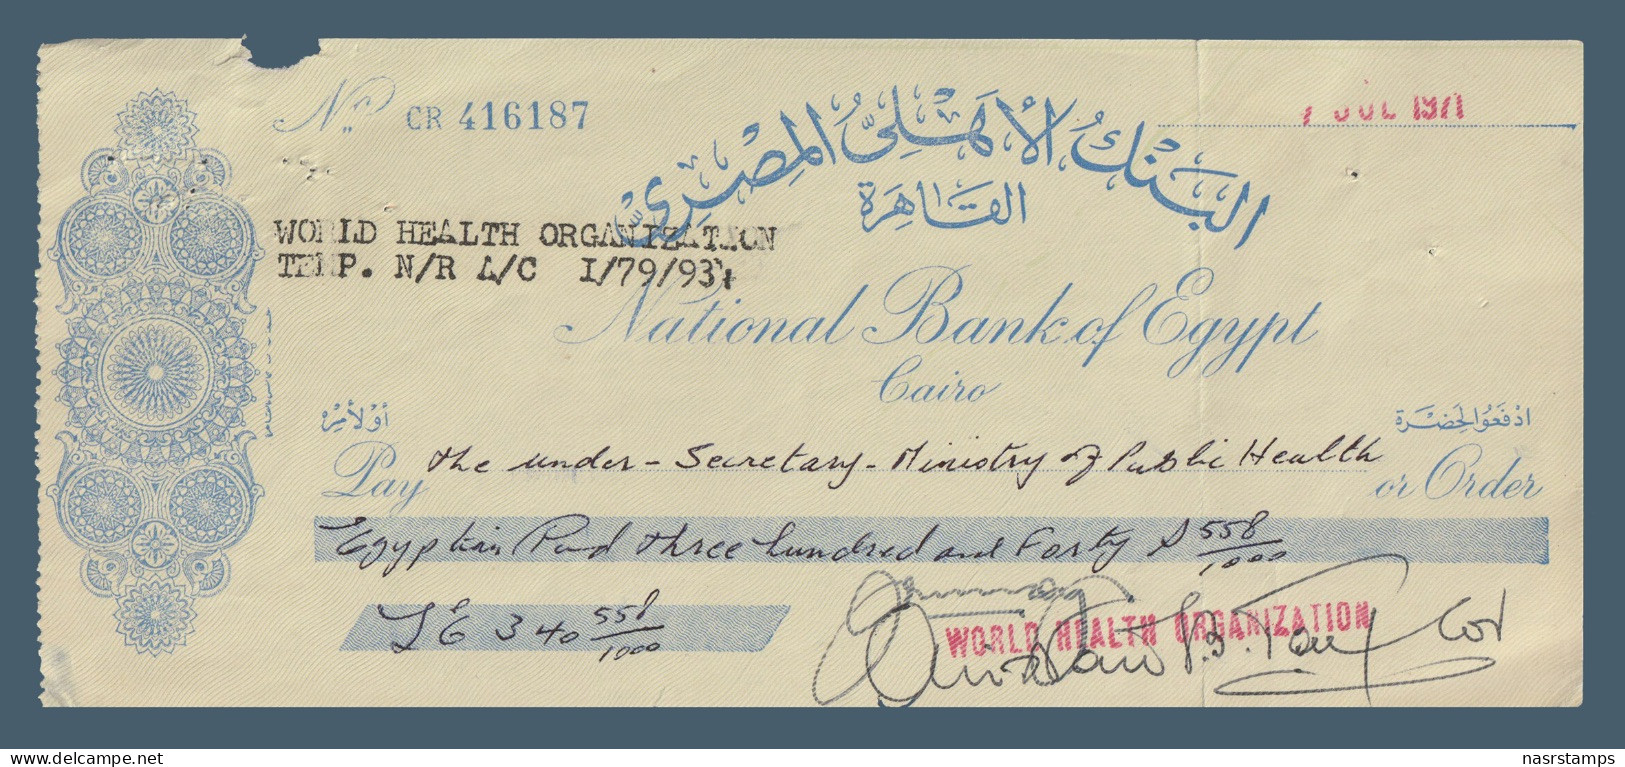 Egypt - 1971 - Vintage Check - ( National Bank Of Egypt ) - Cheques & Traveler's Cheques